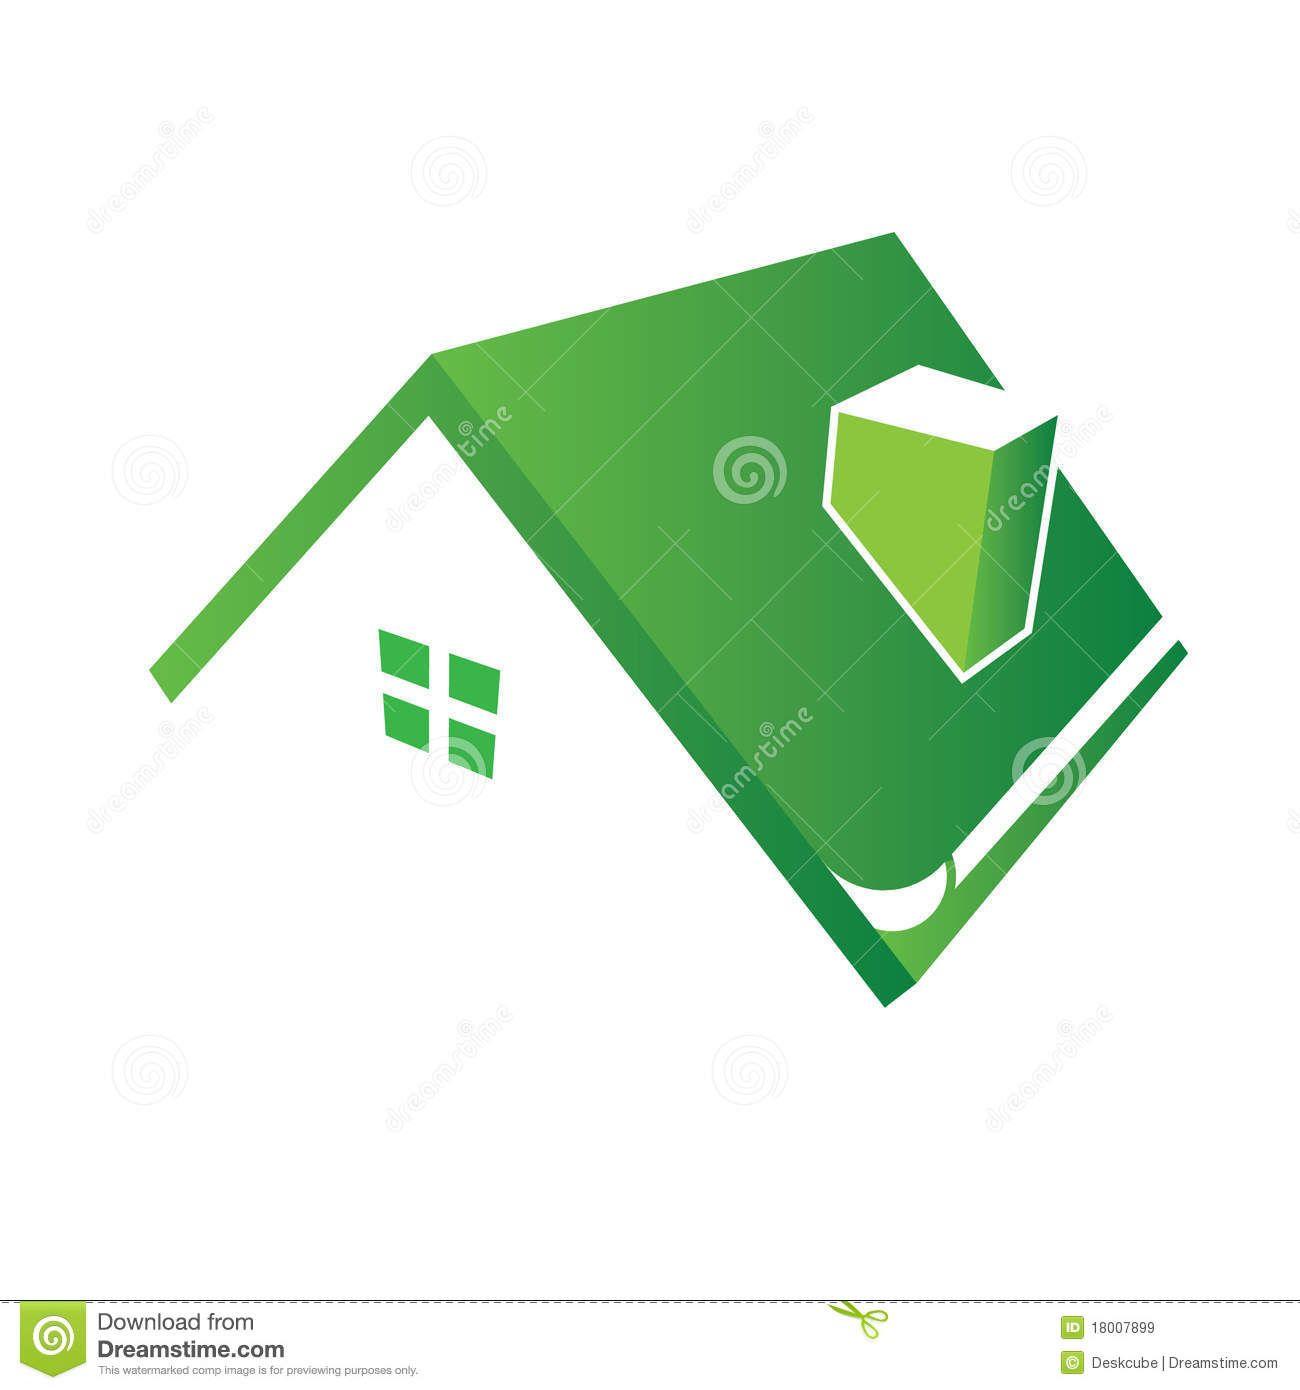 Home Roof Logo - Home roof logo Clipart Image